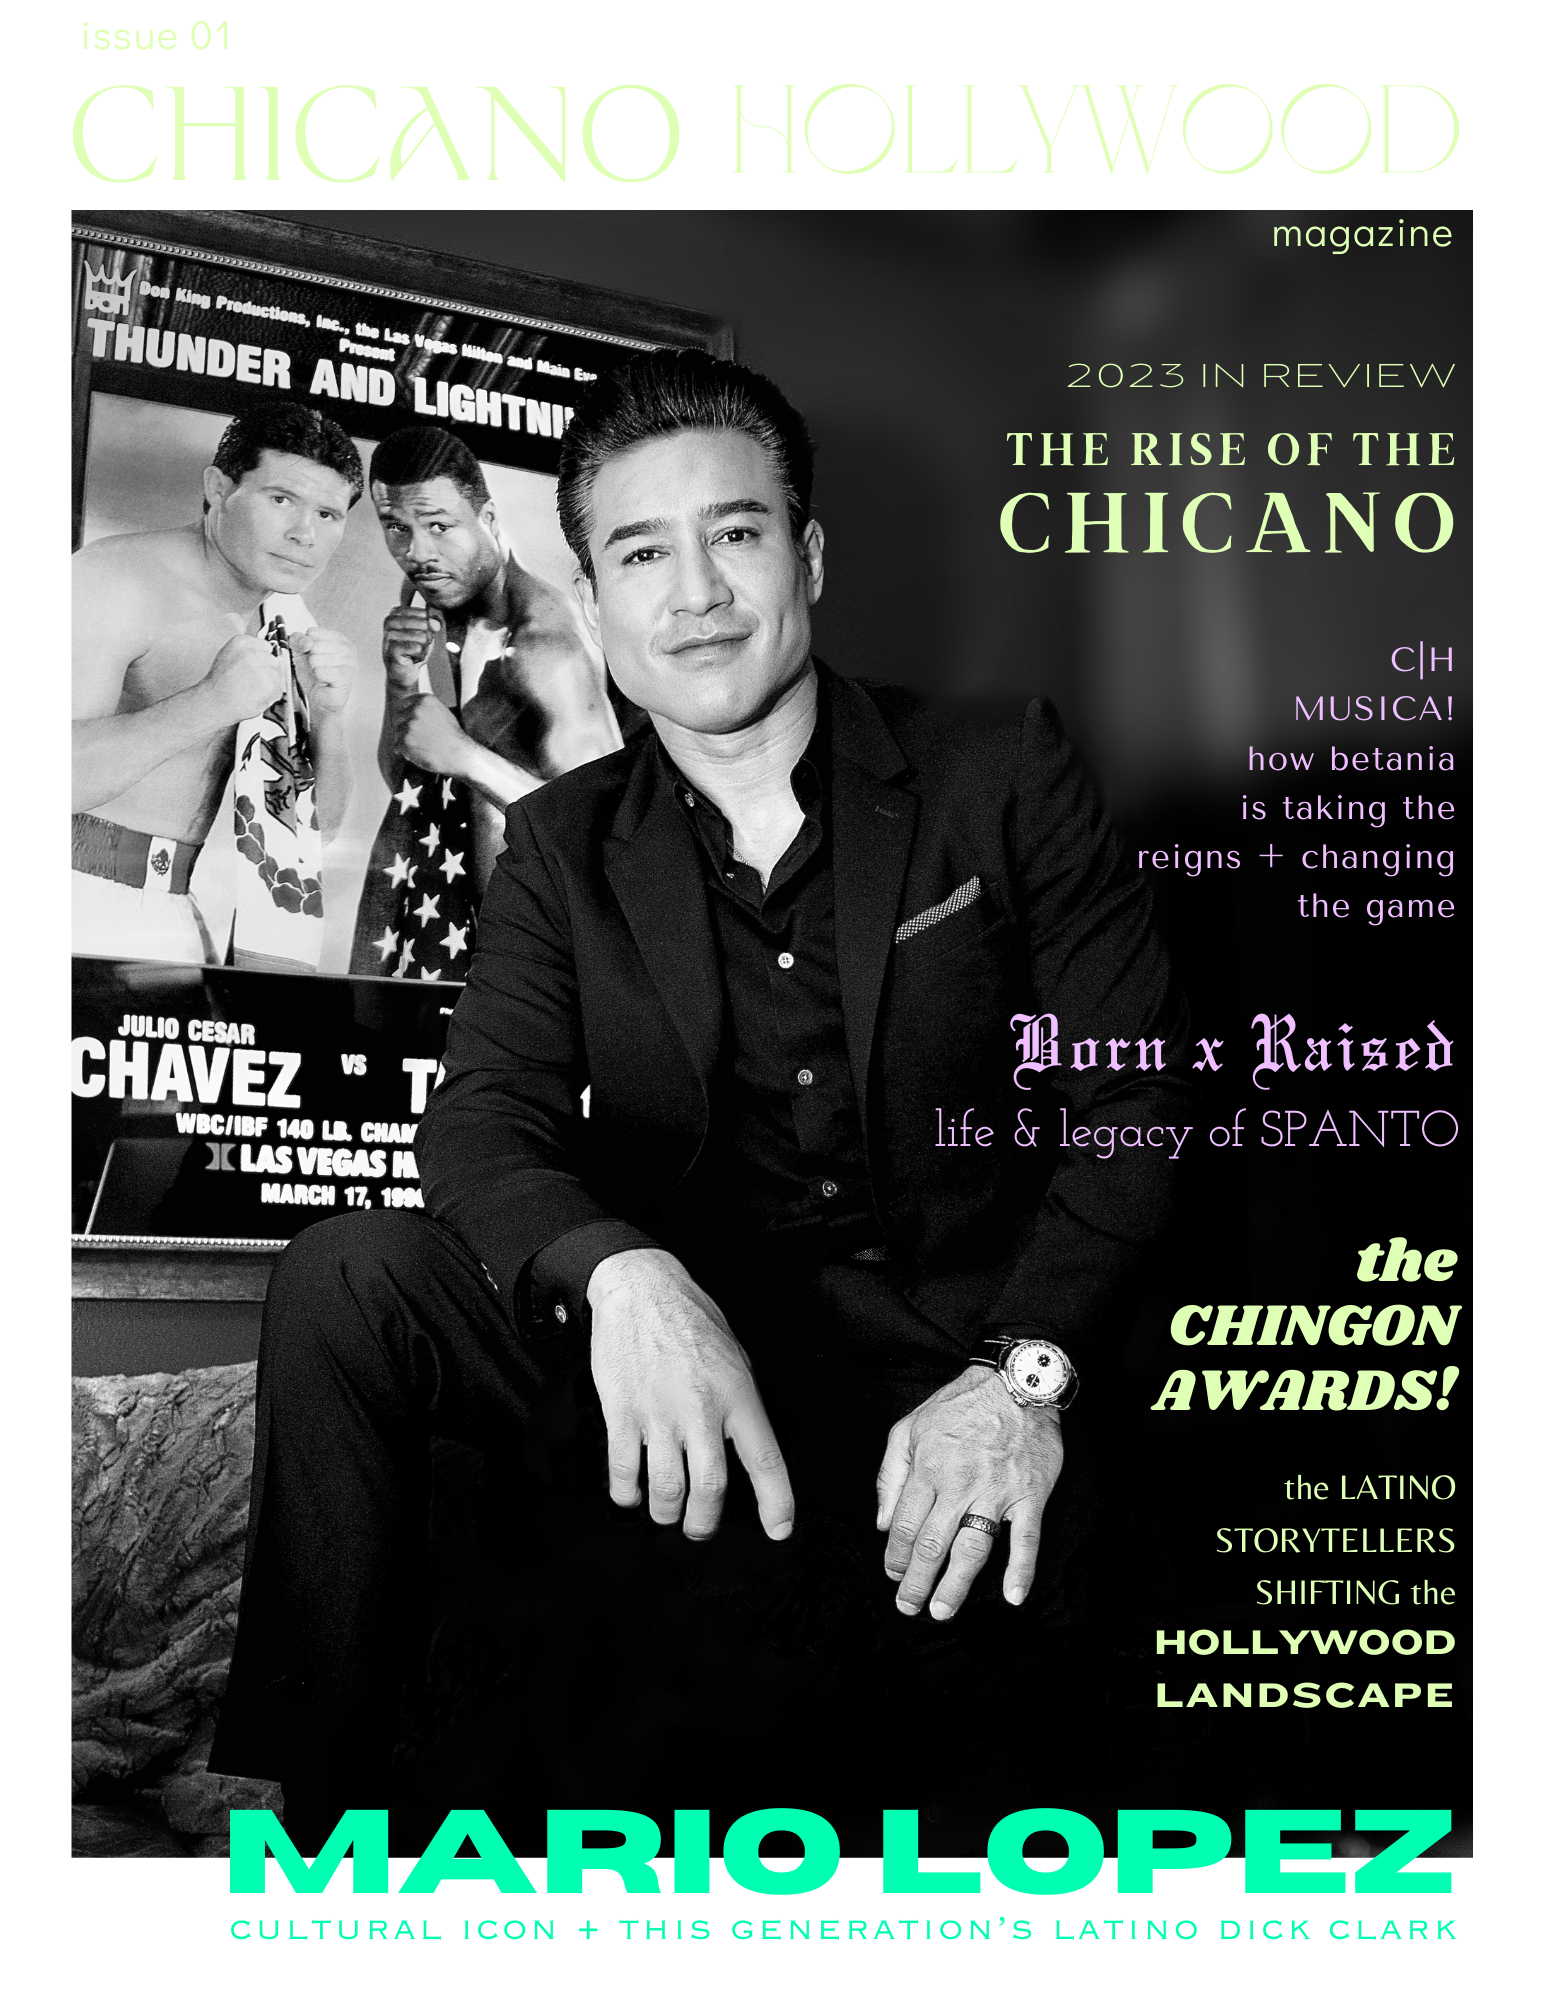 The front cover of the Chicano Hollywood magazine. The picture is of Mario Lopez.